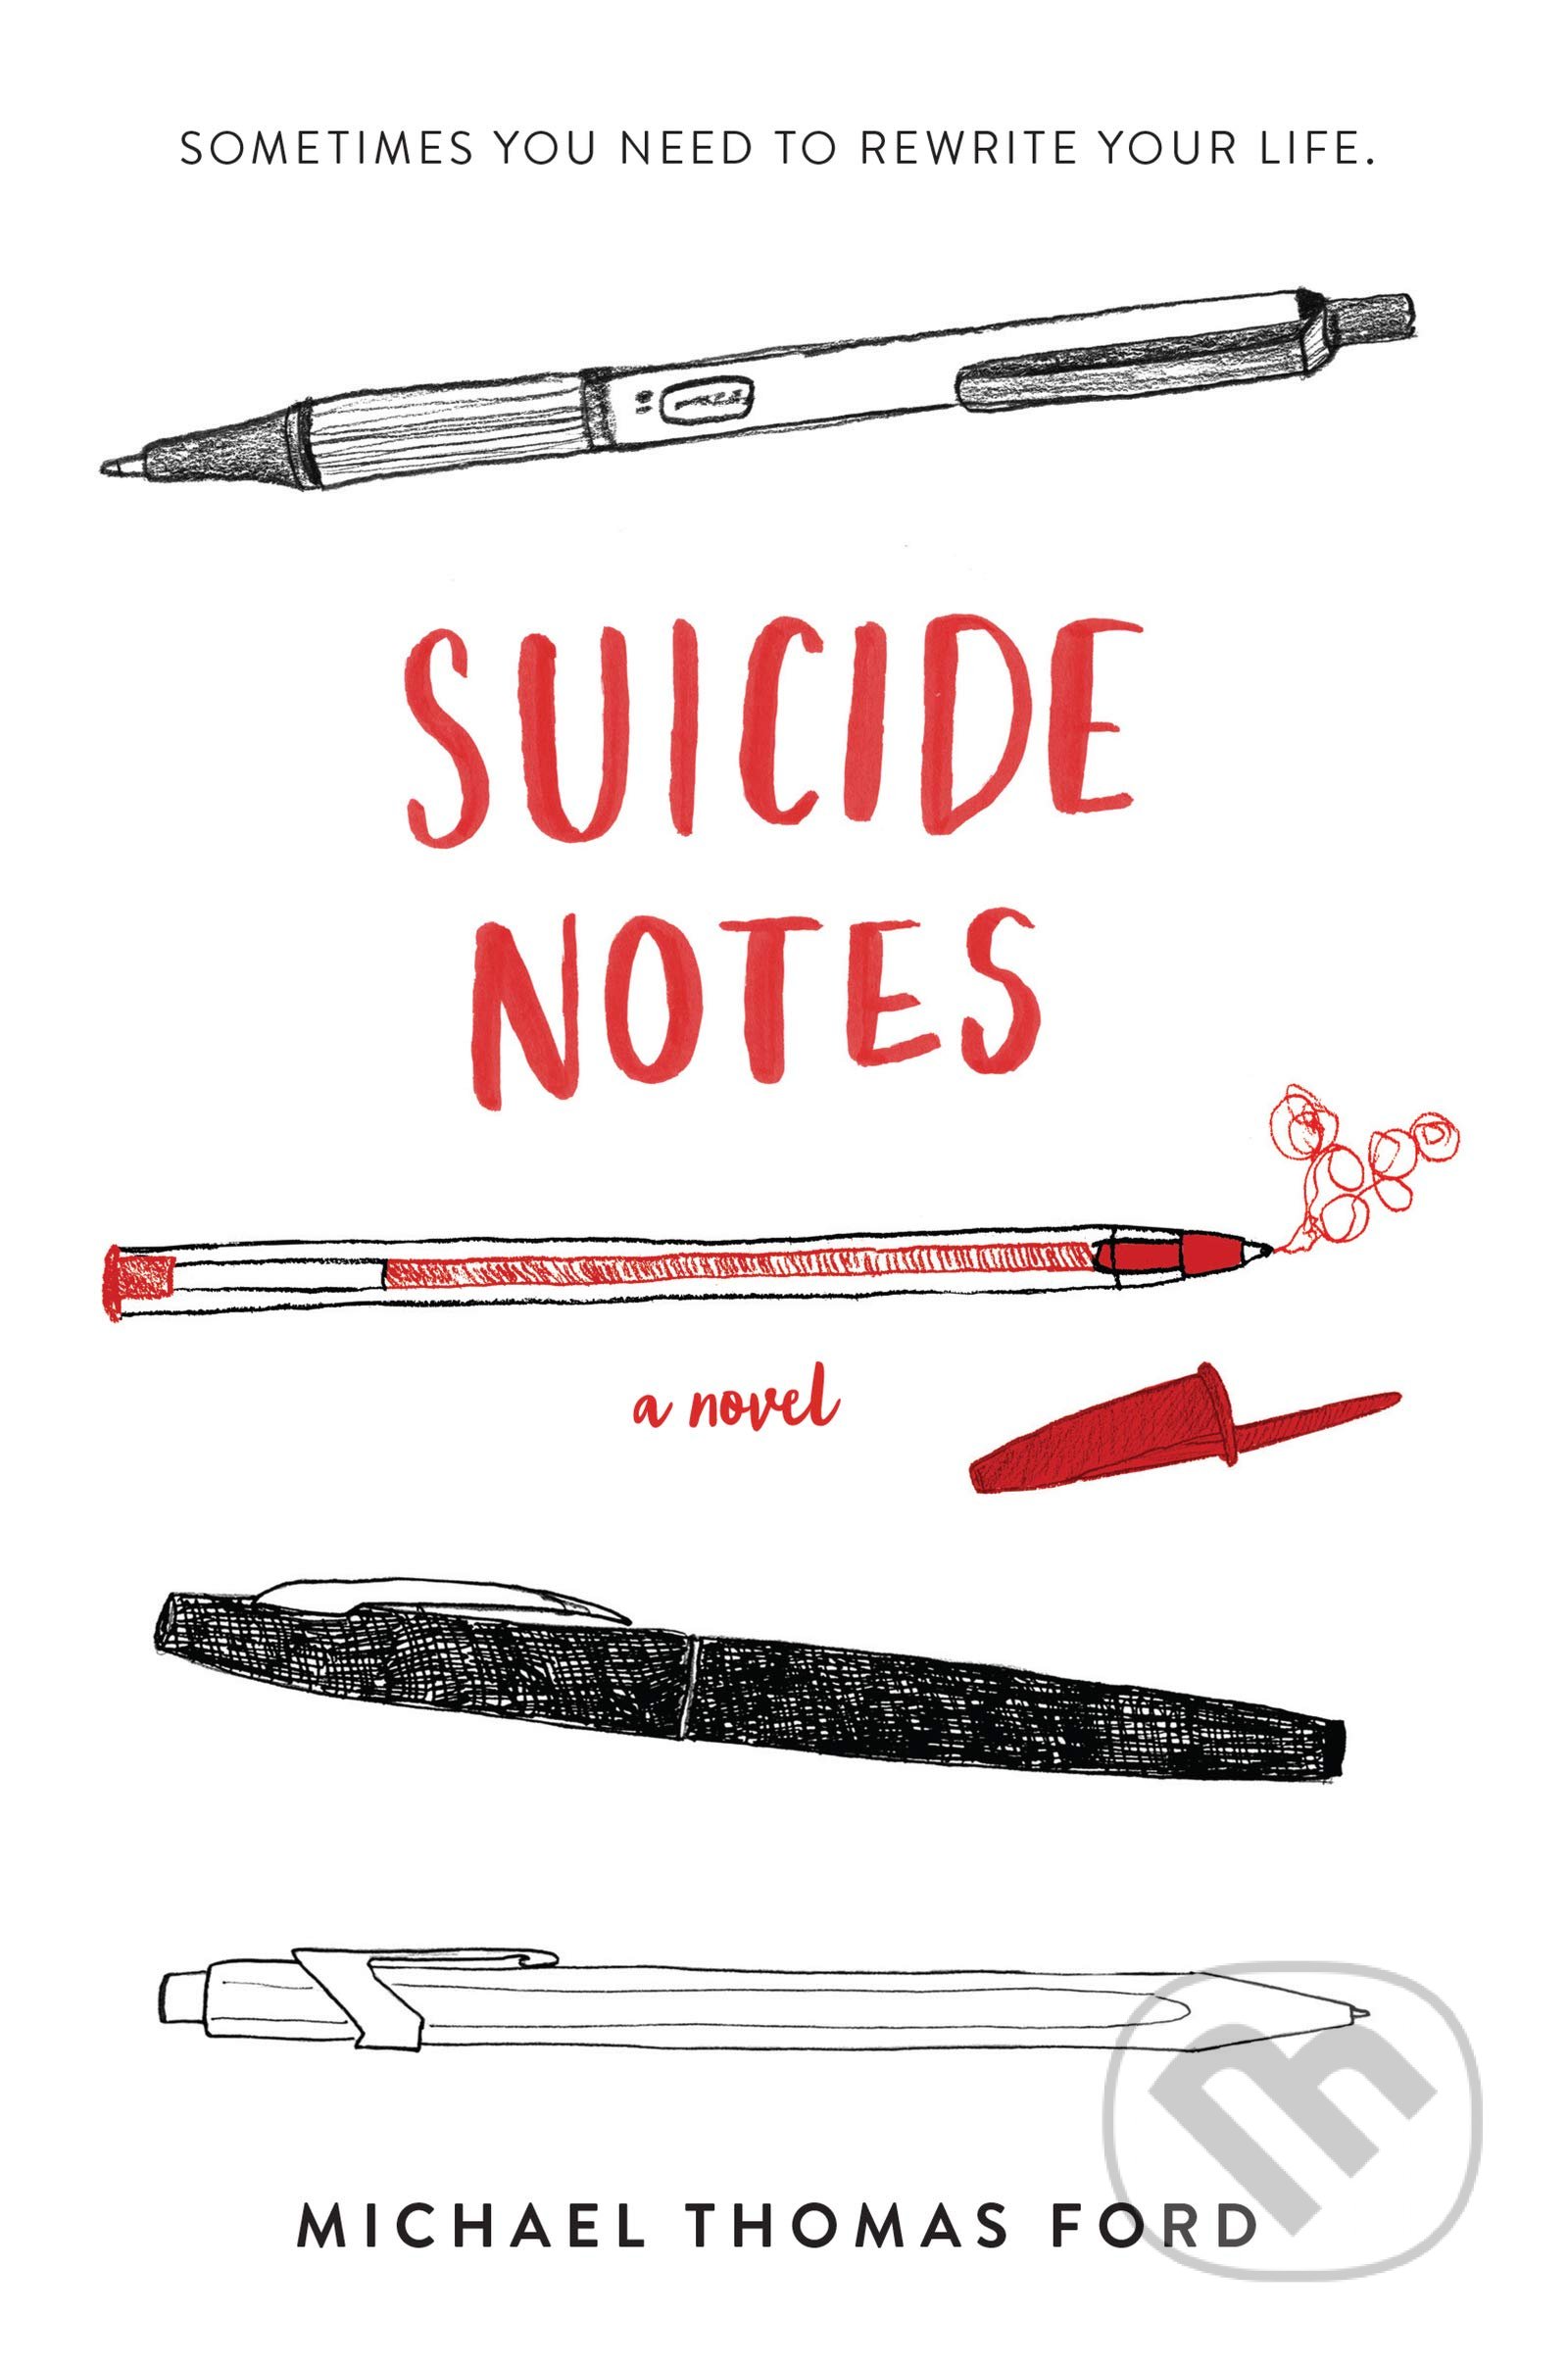 Suicide Notes - Michael Thomas Ford, HarperTeen, 2019